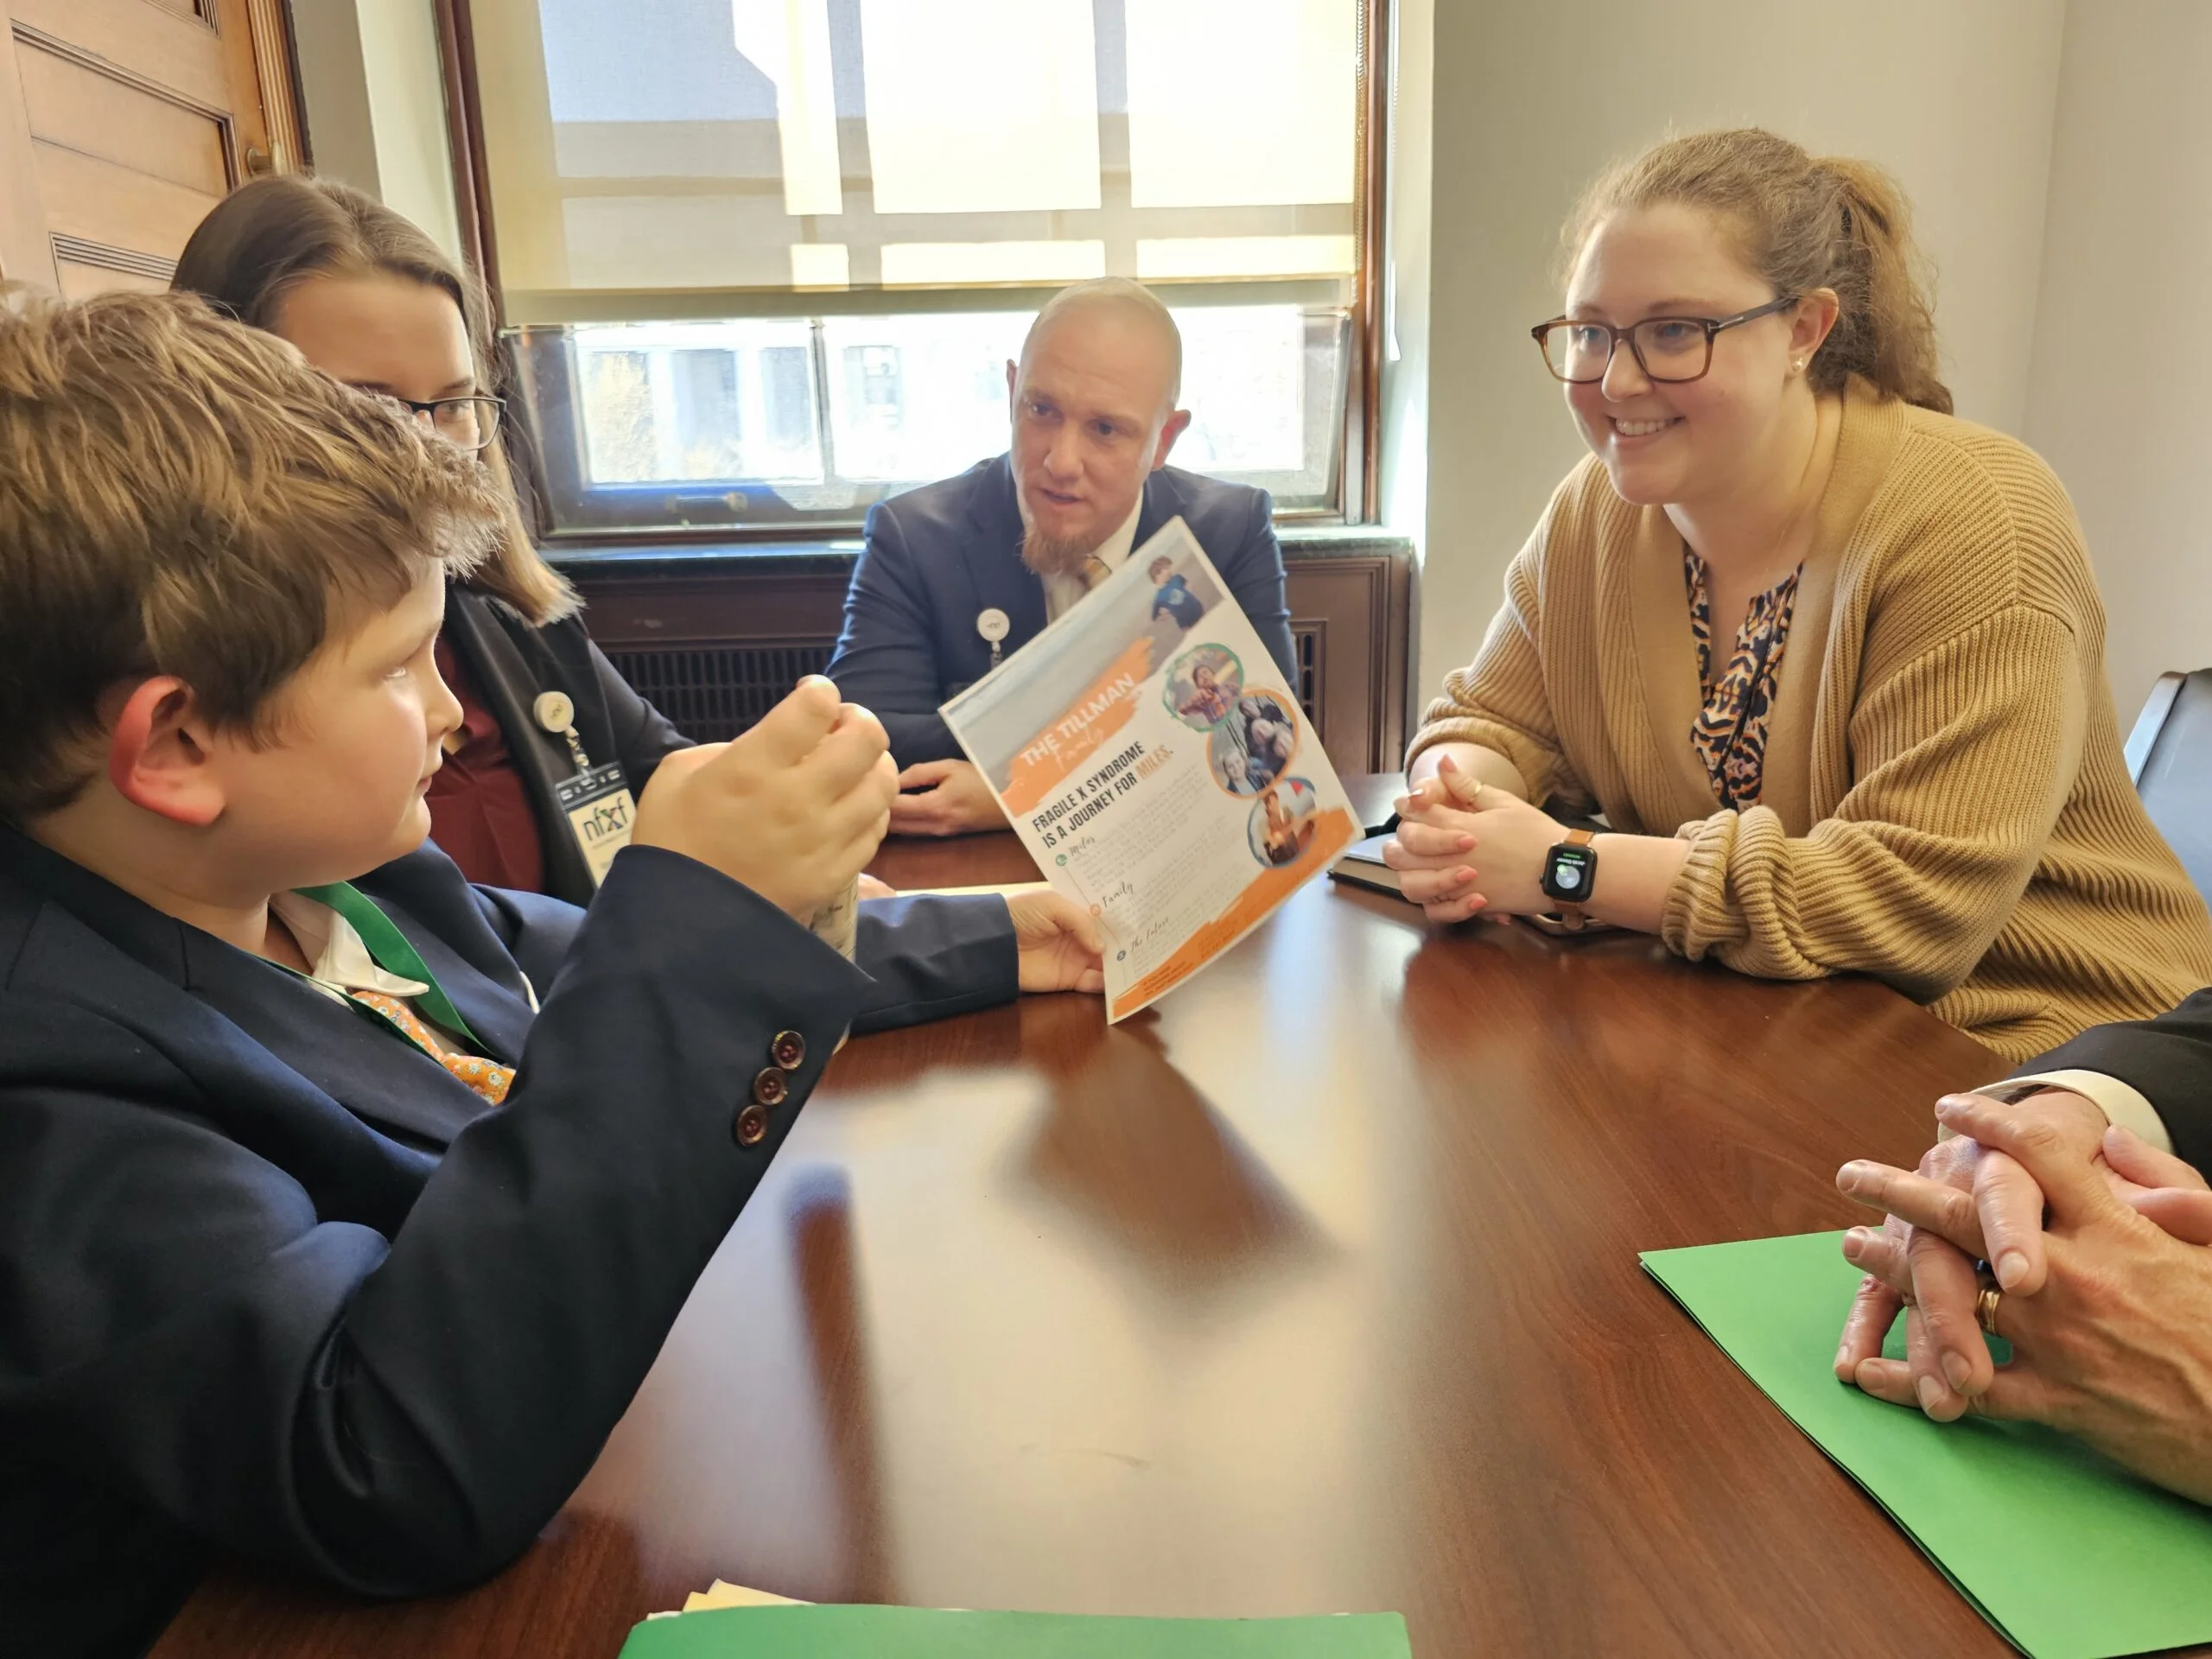 Eight-year-old Miles Tillman telling his story to the legislative aide to Representative Wiley Nickel, Rachel Kline. (From left to right), Miles, his sister Mary Haven, dad David and Kline.